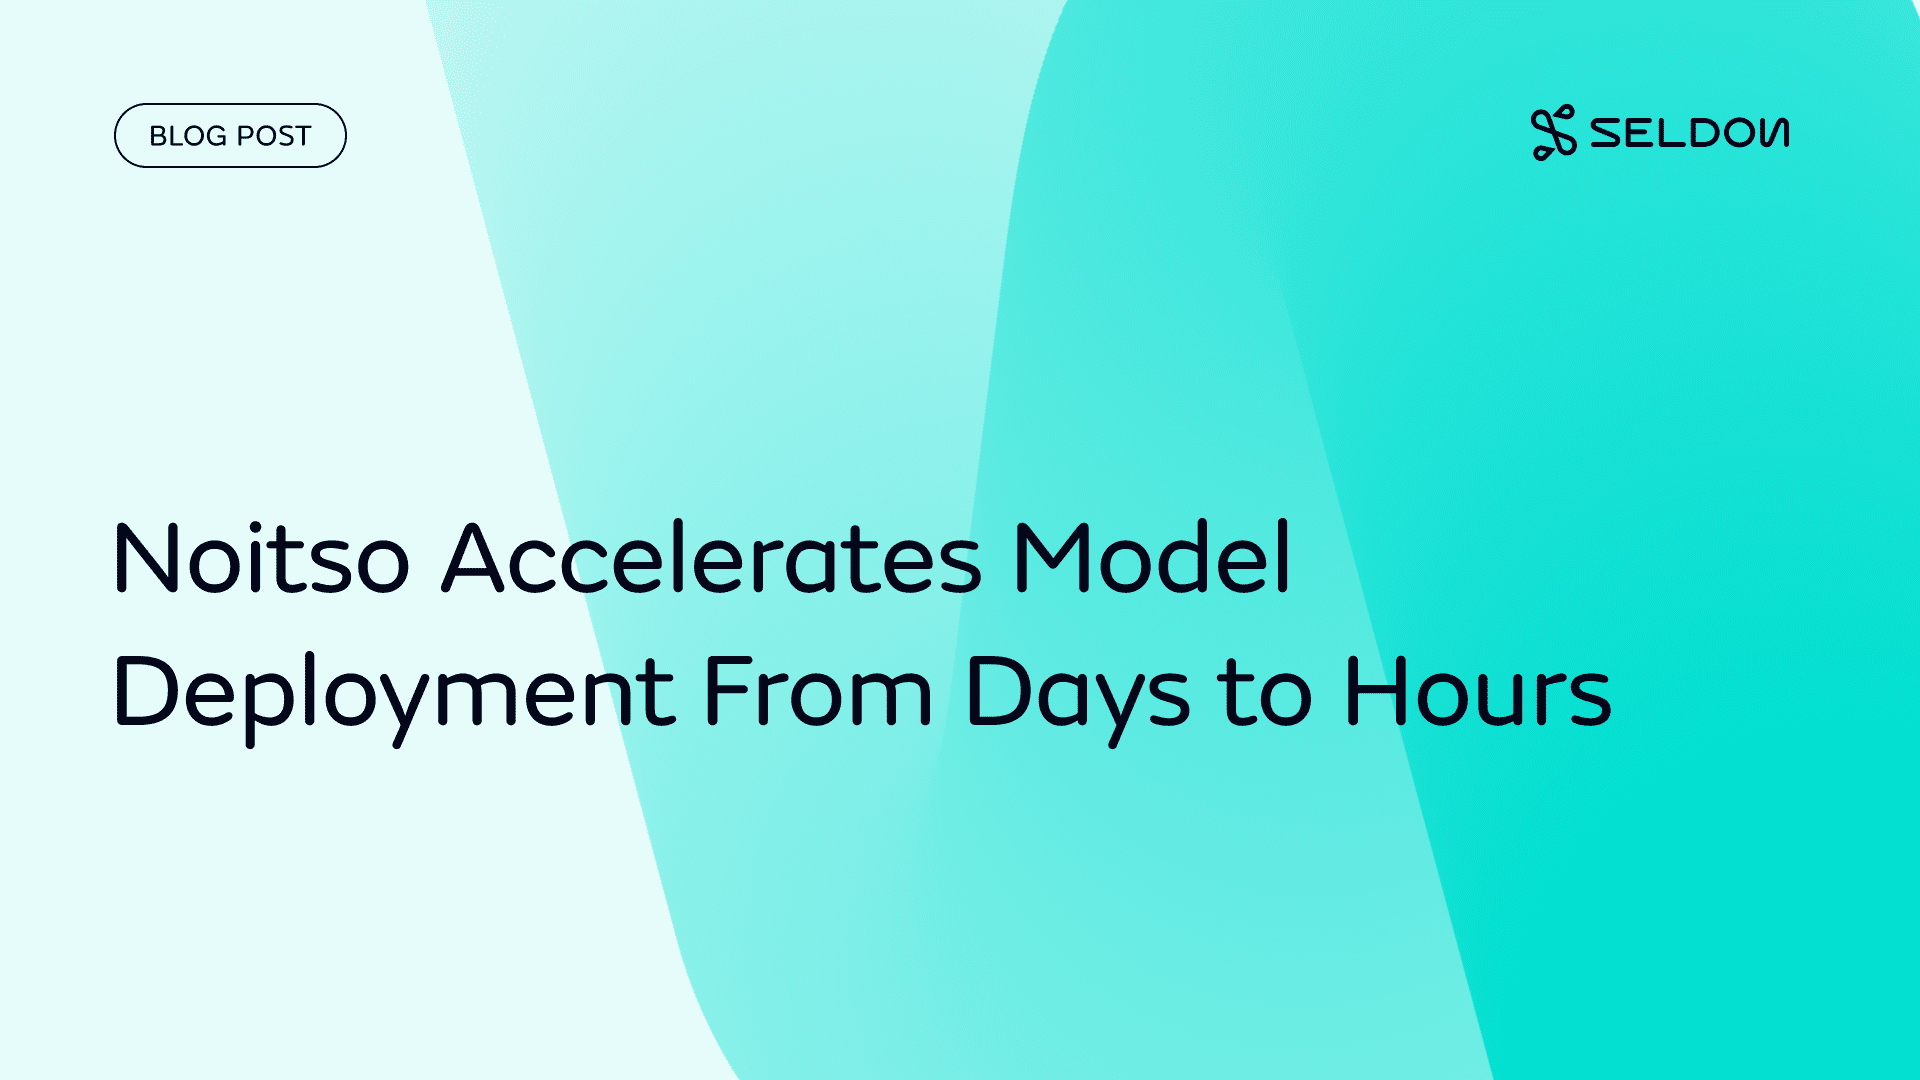 Noitso accelerates model deployment from days to hours